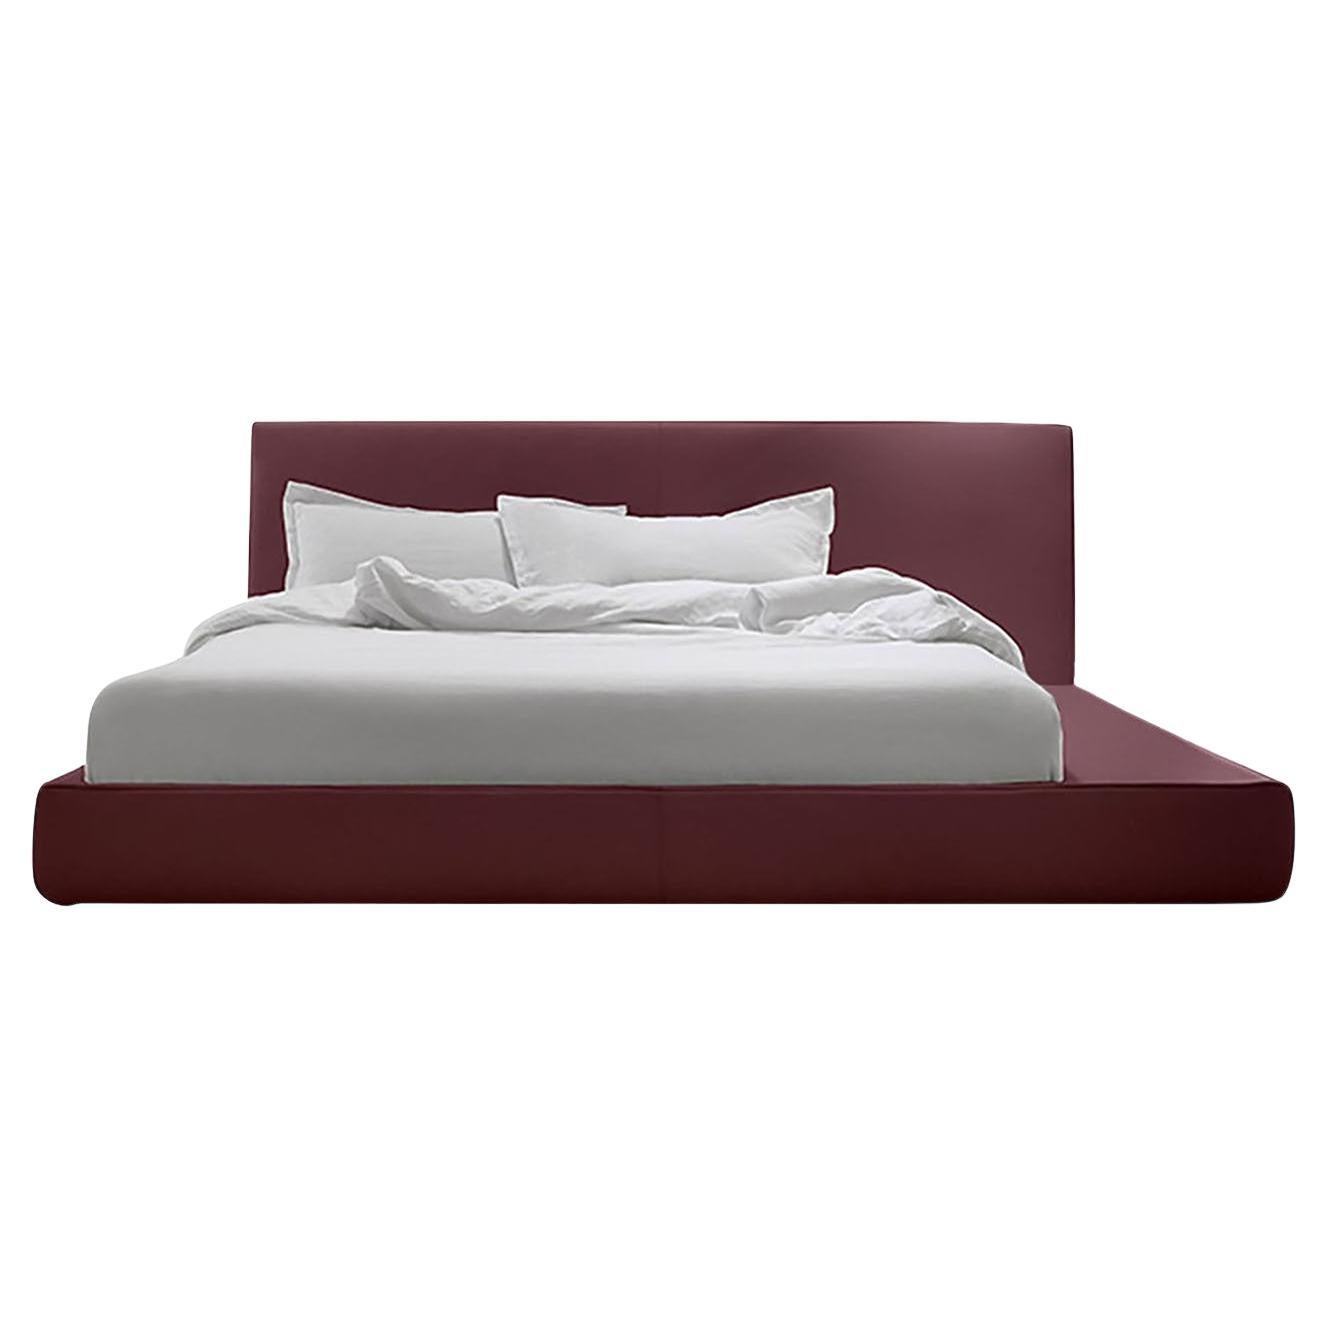 Long Island Wine-Red Double Bed For Sale